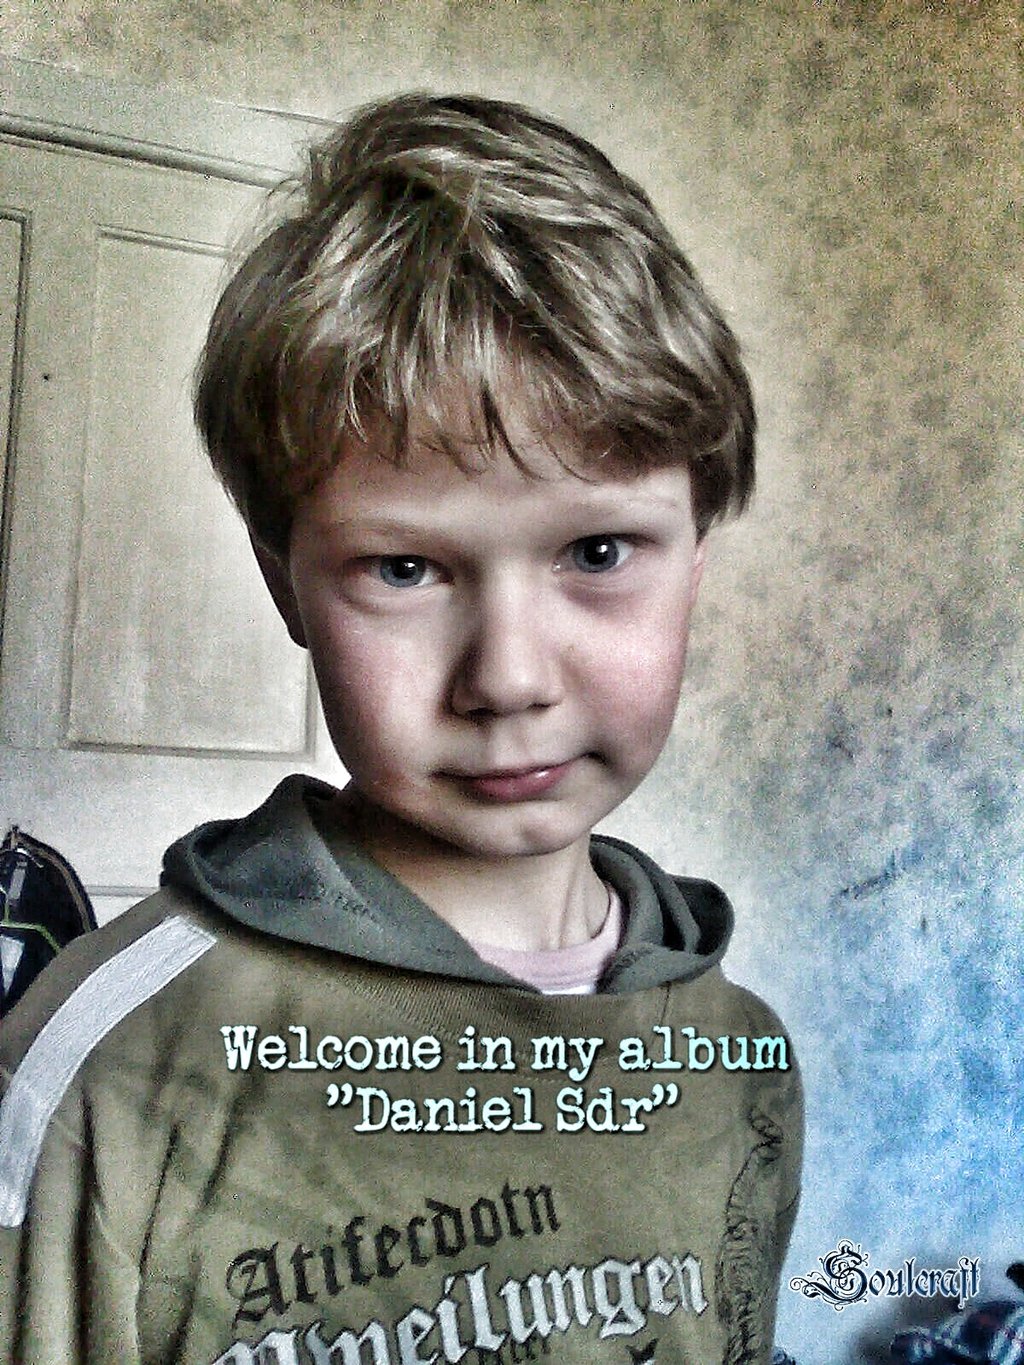 Daniel Sdr049_welcome_welcome-01